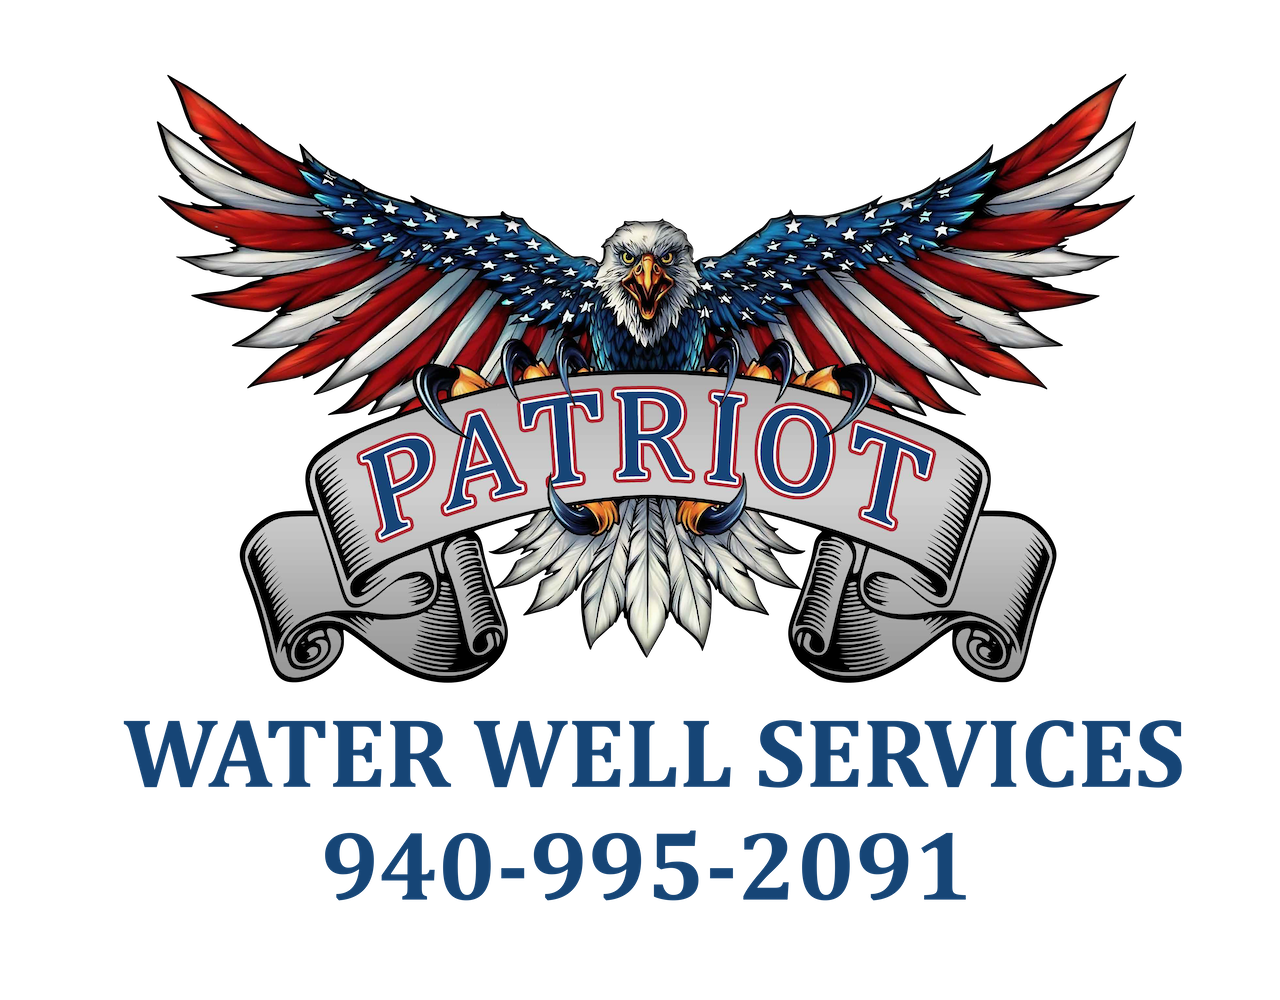 Patriot Water Well Services logo with American eagle colored with flag colors and carrying a banner with "Patriot" 940-995-2091